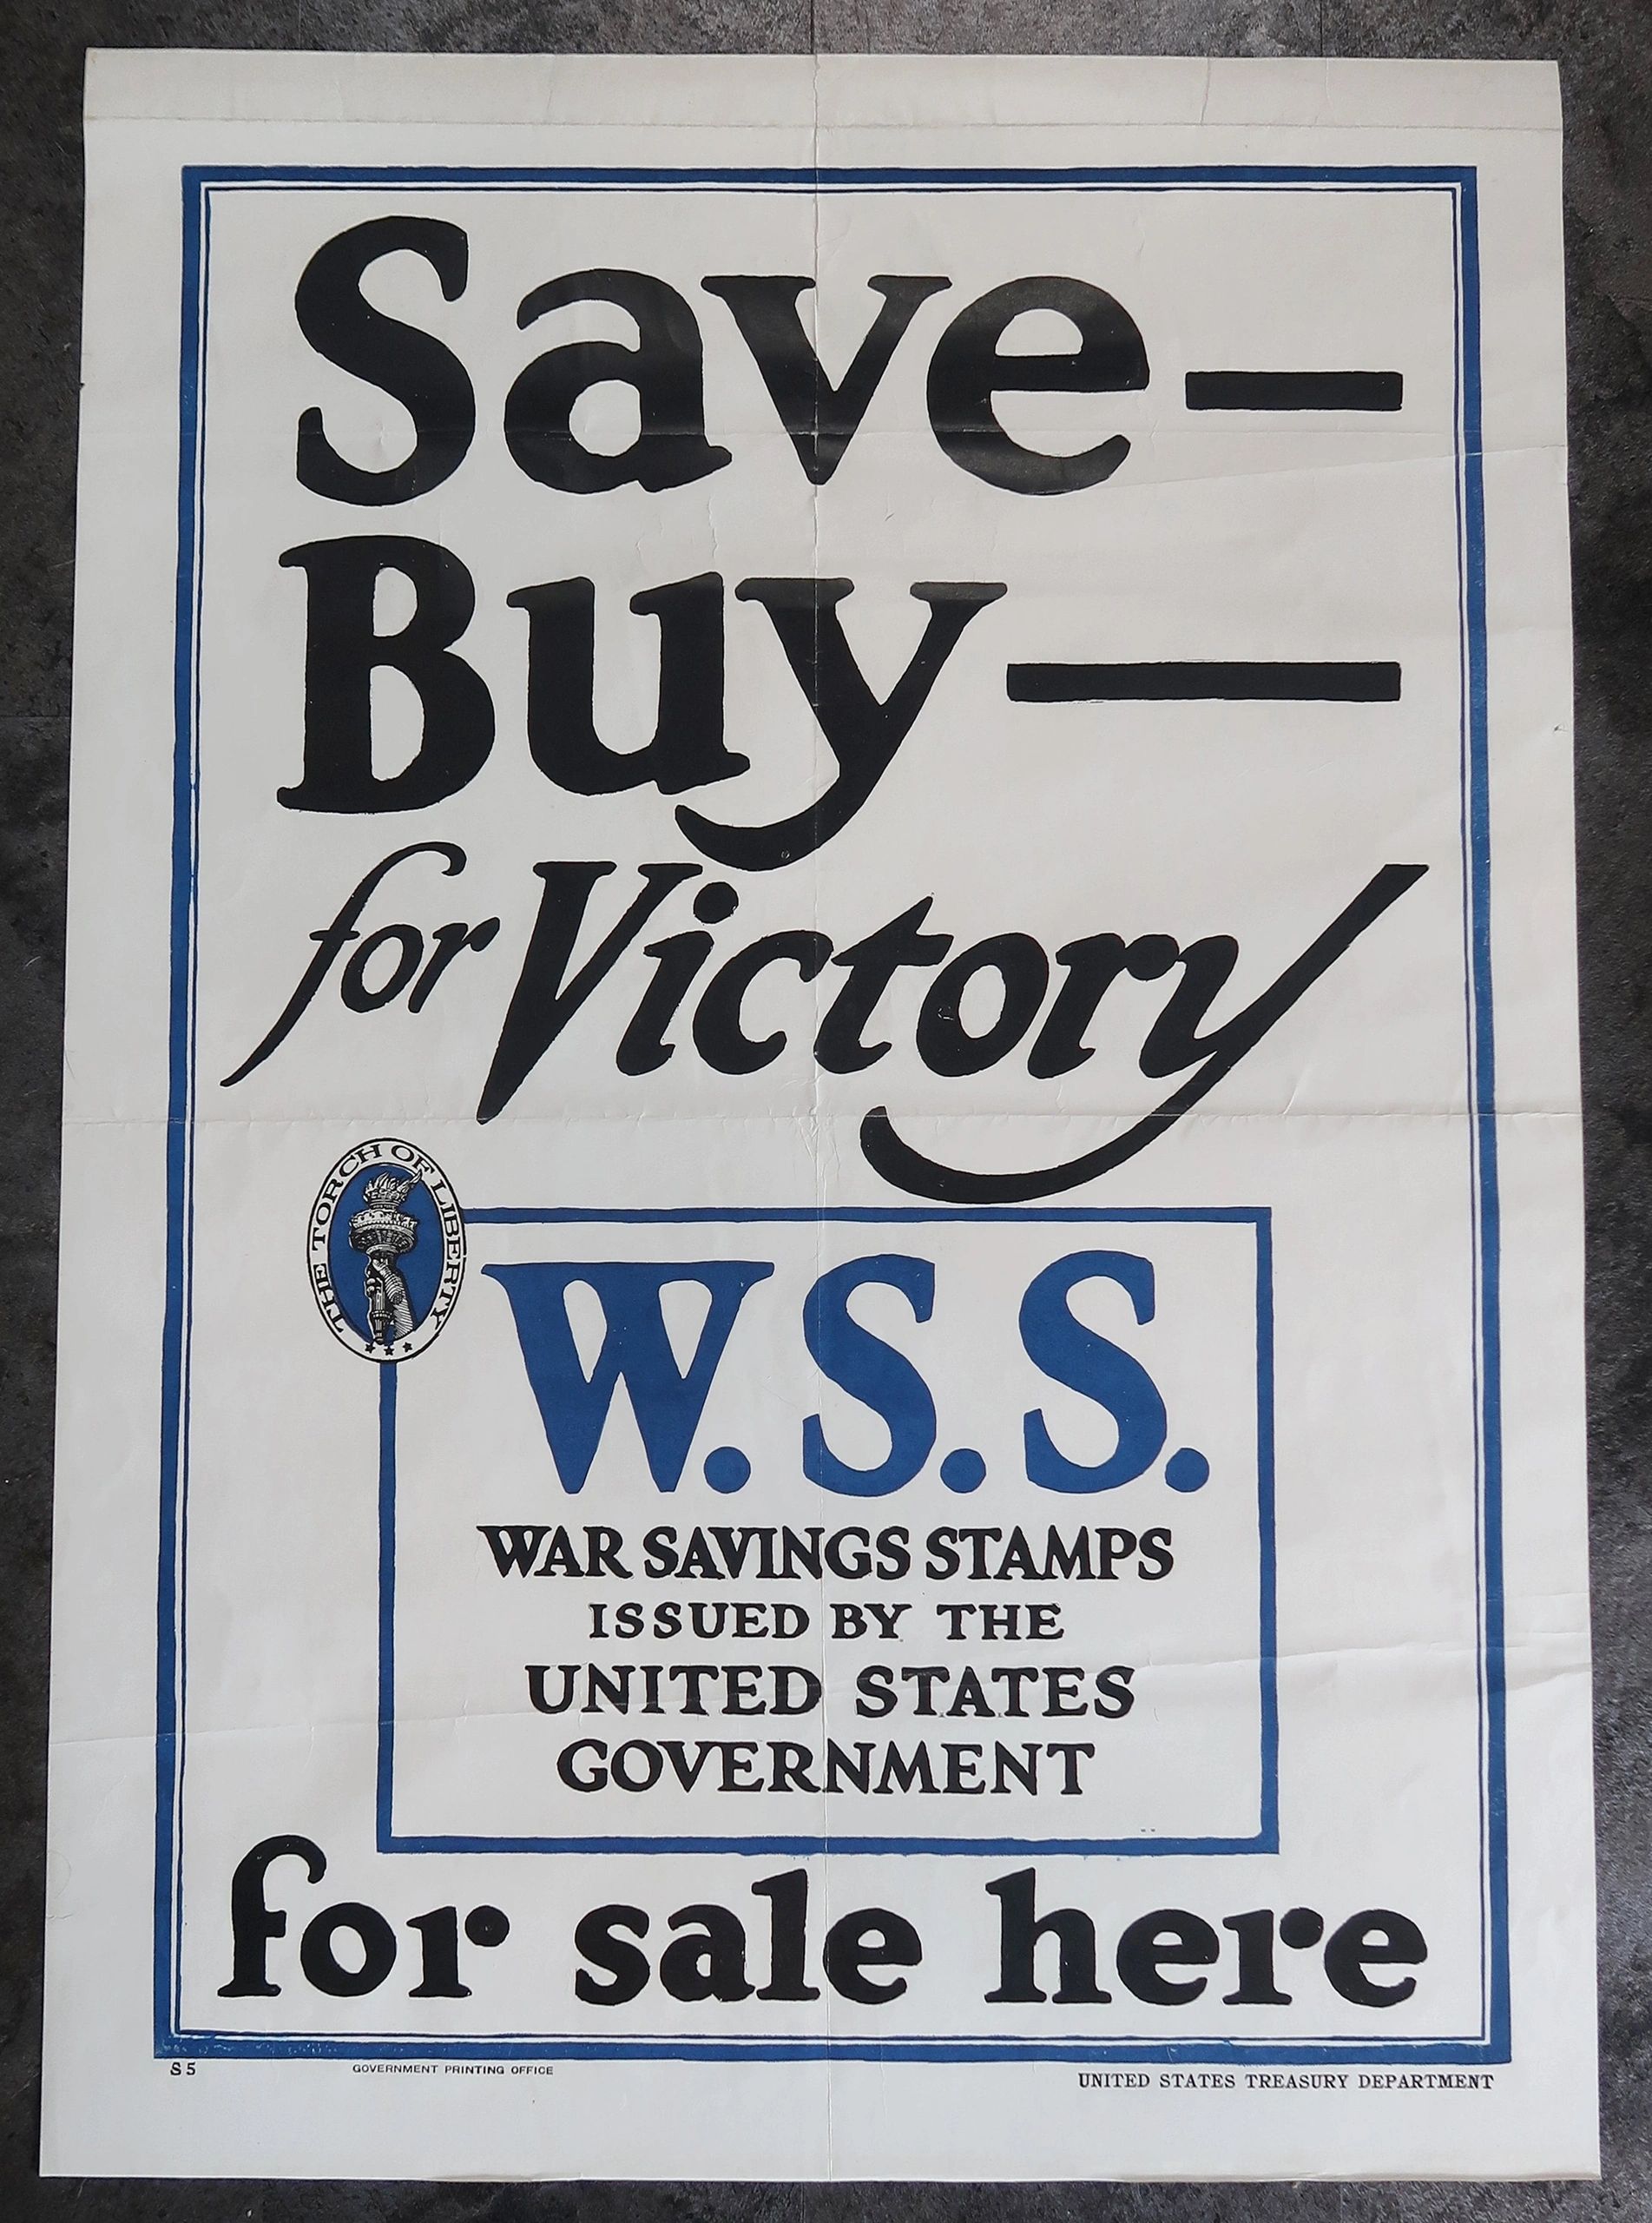 WW2 Save Buy For Victory War Savings Stamps Poster